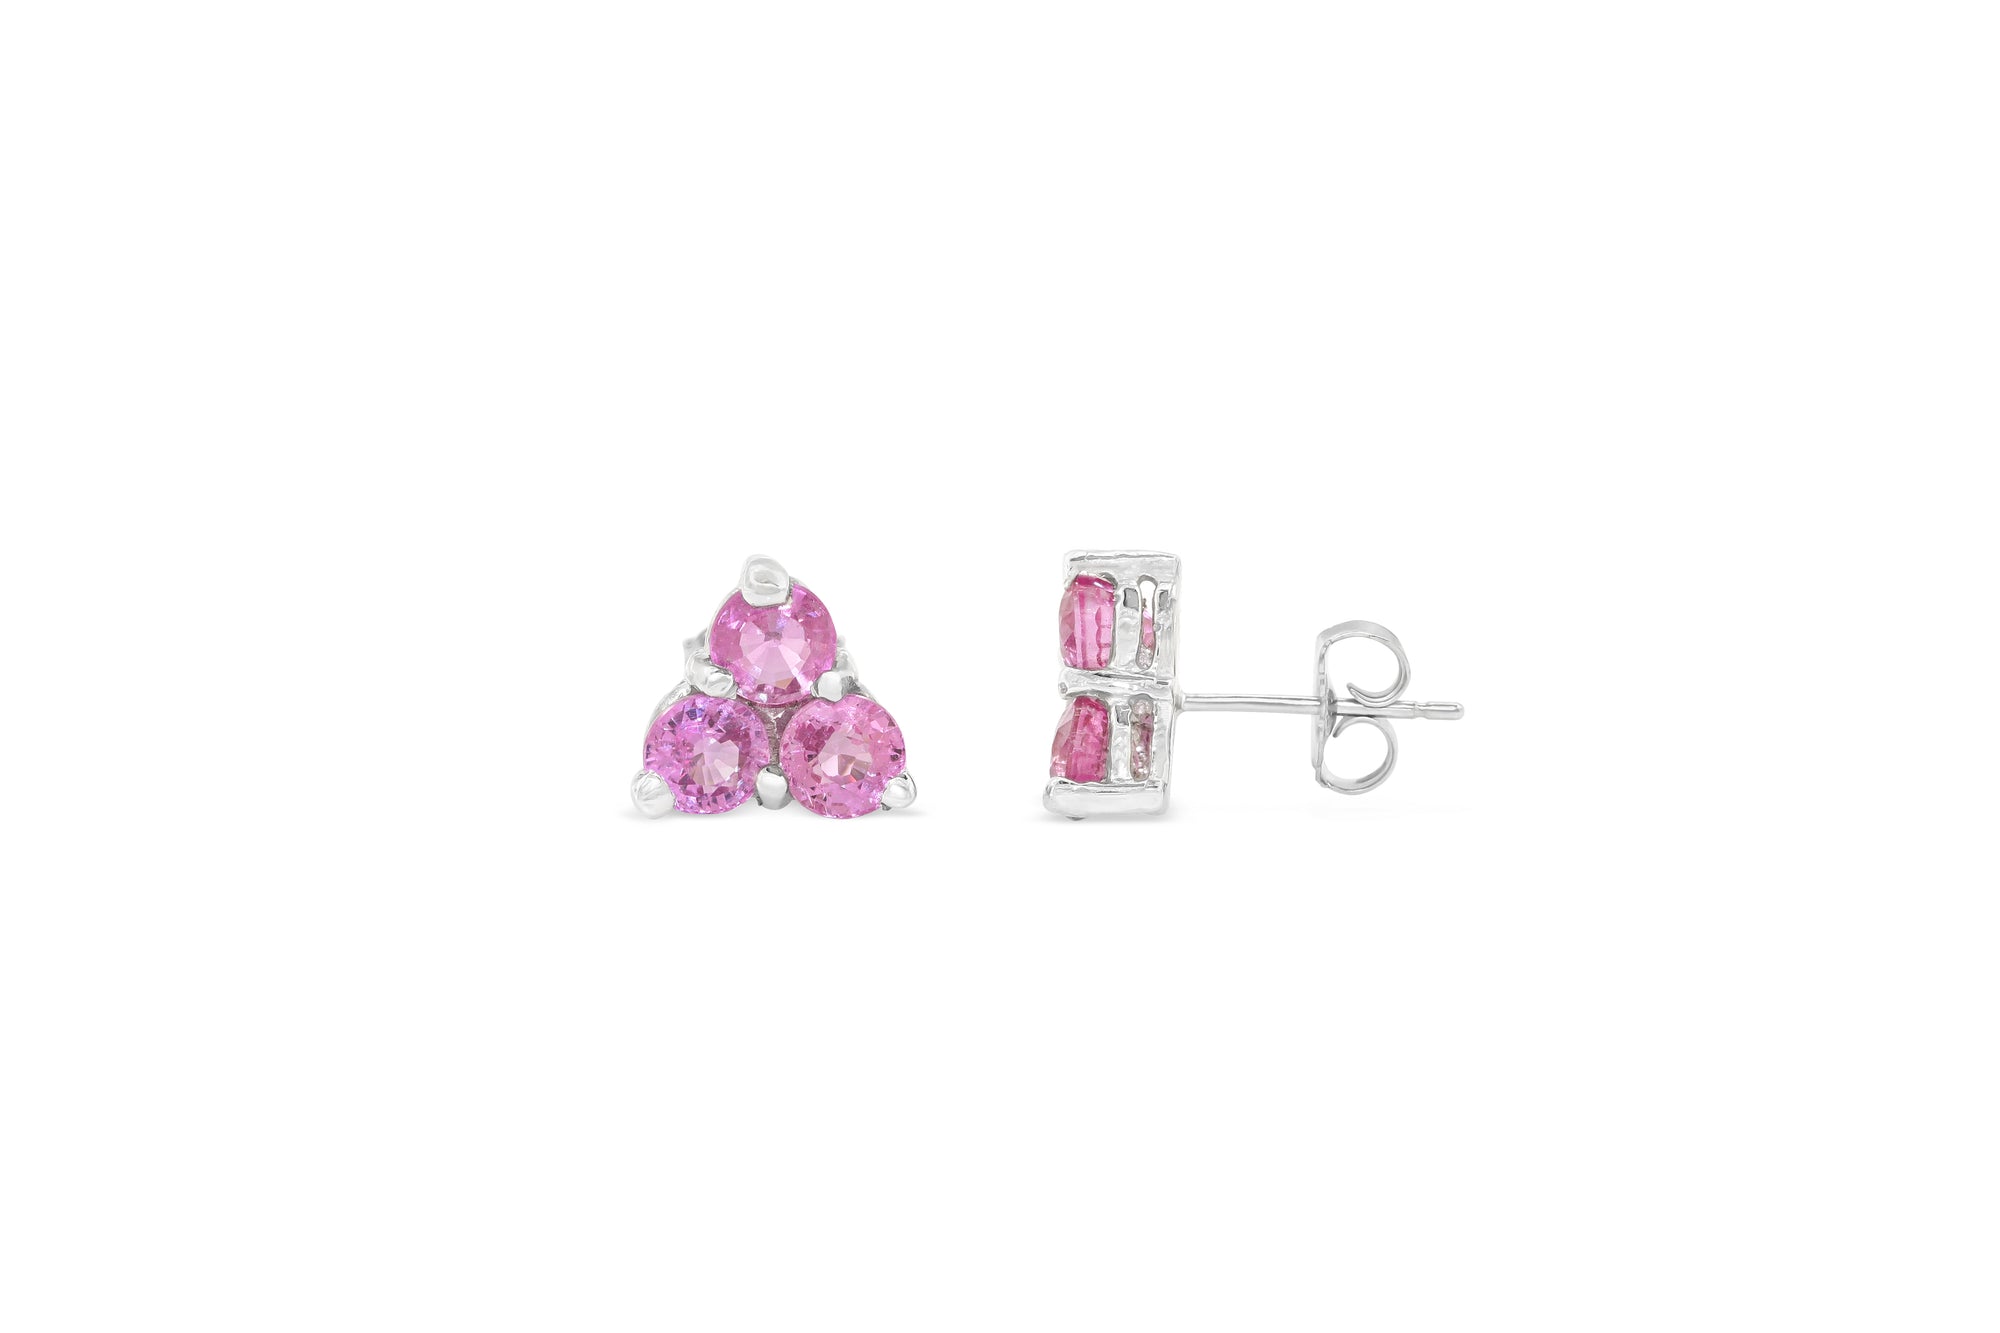 4.20 CT Pink Sapphire Earring 14K White Gold PSER002 - NorthandSouthJewelry